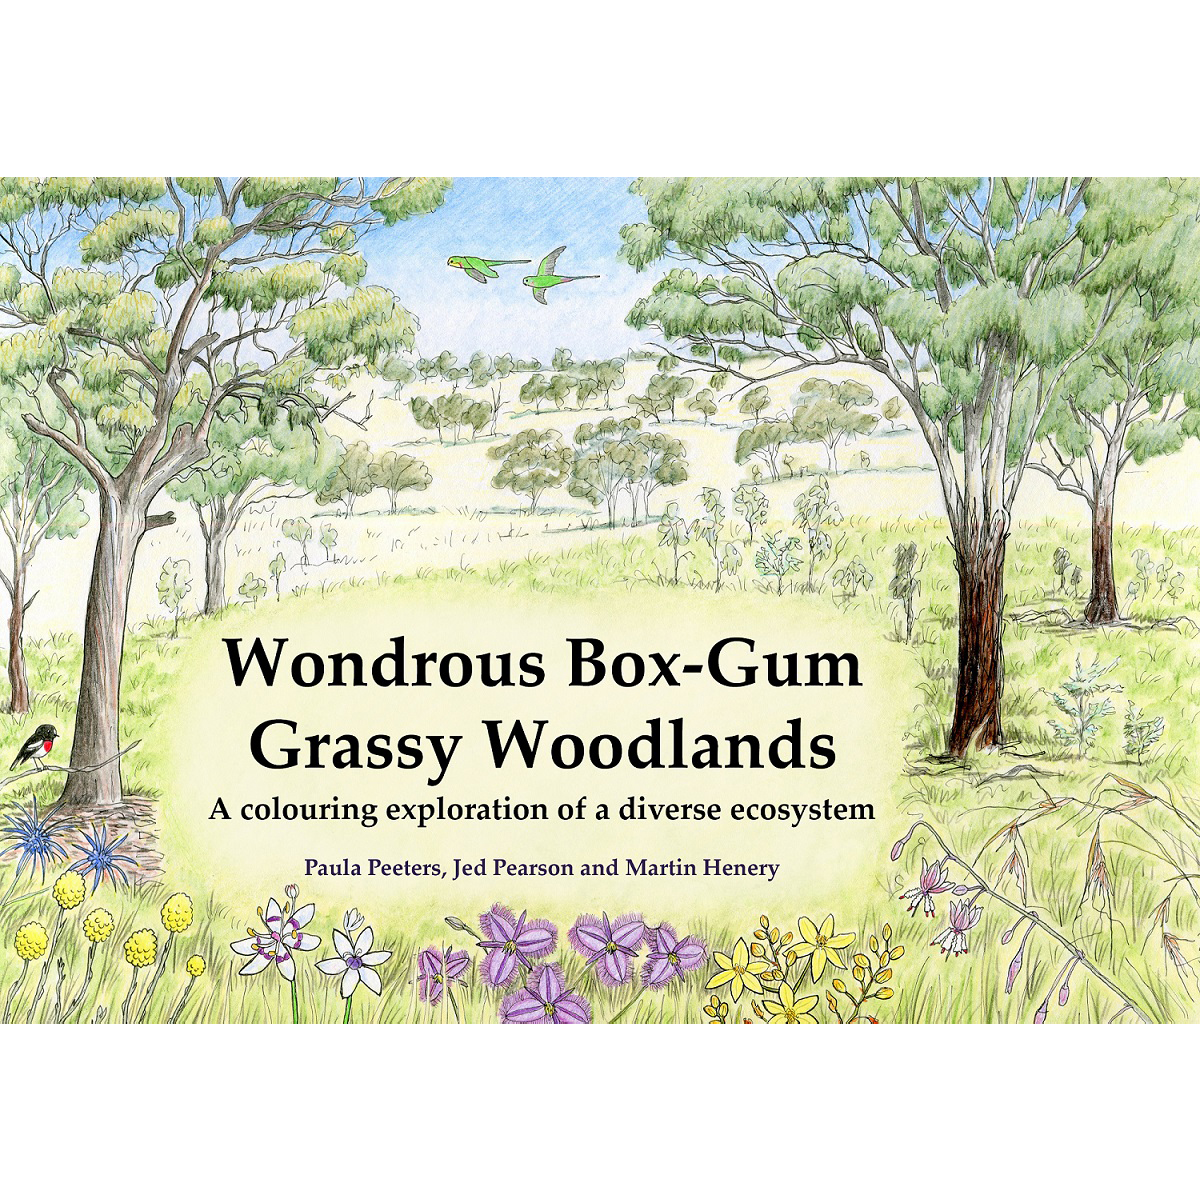 Free grassy woodland colouring book to download